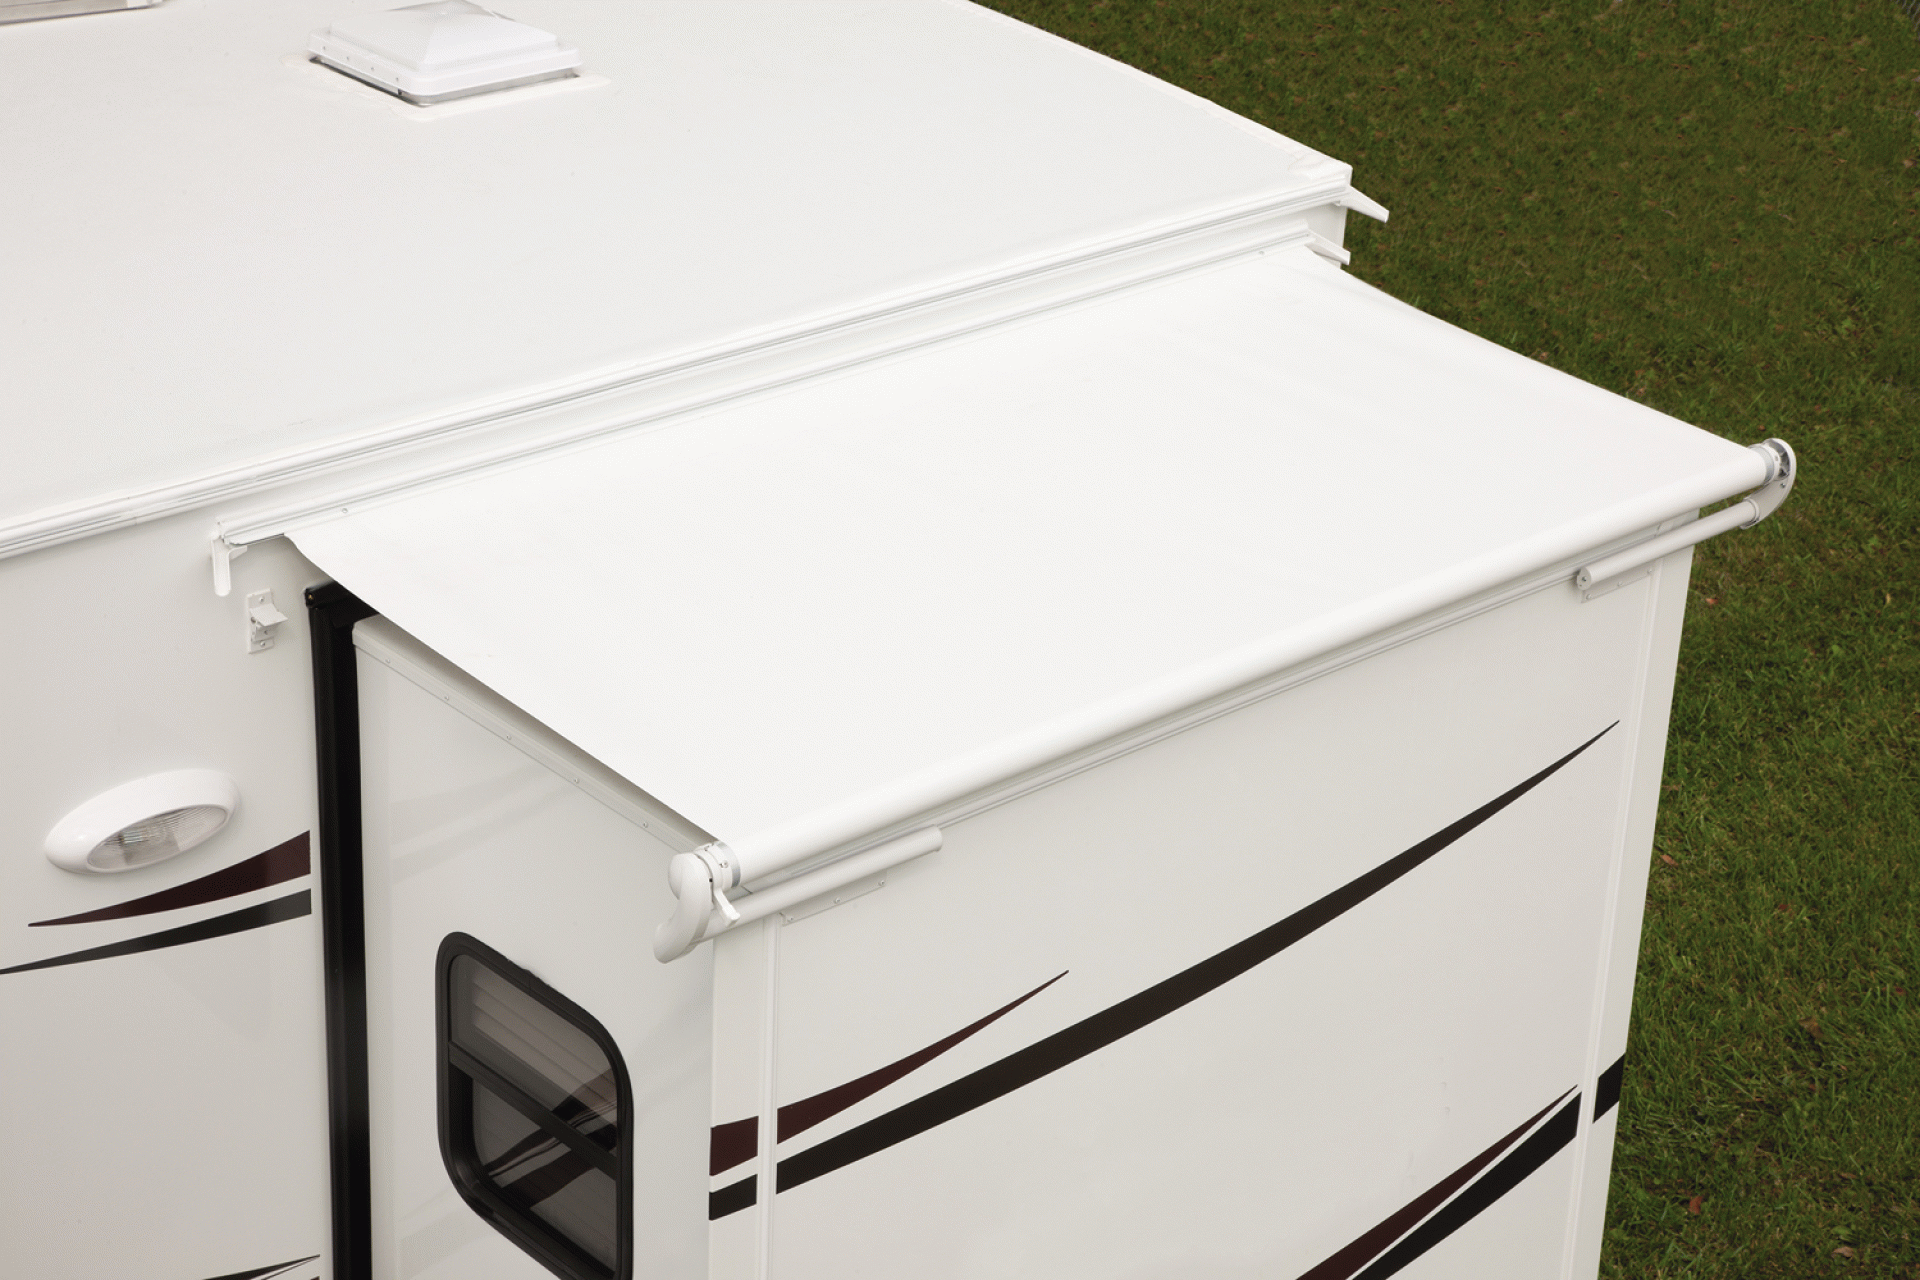 DOMETIC | 98001CQ.096B | DELUXE SLIDE TOPPER 96" FITS ROOM WIDTH 86"-91 3/4" WHITE VINYL WHITE WEATHERSHIELD